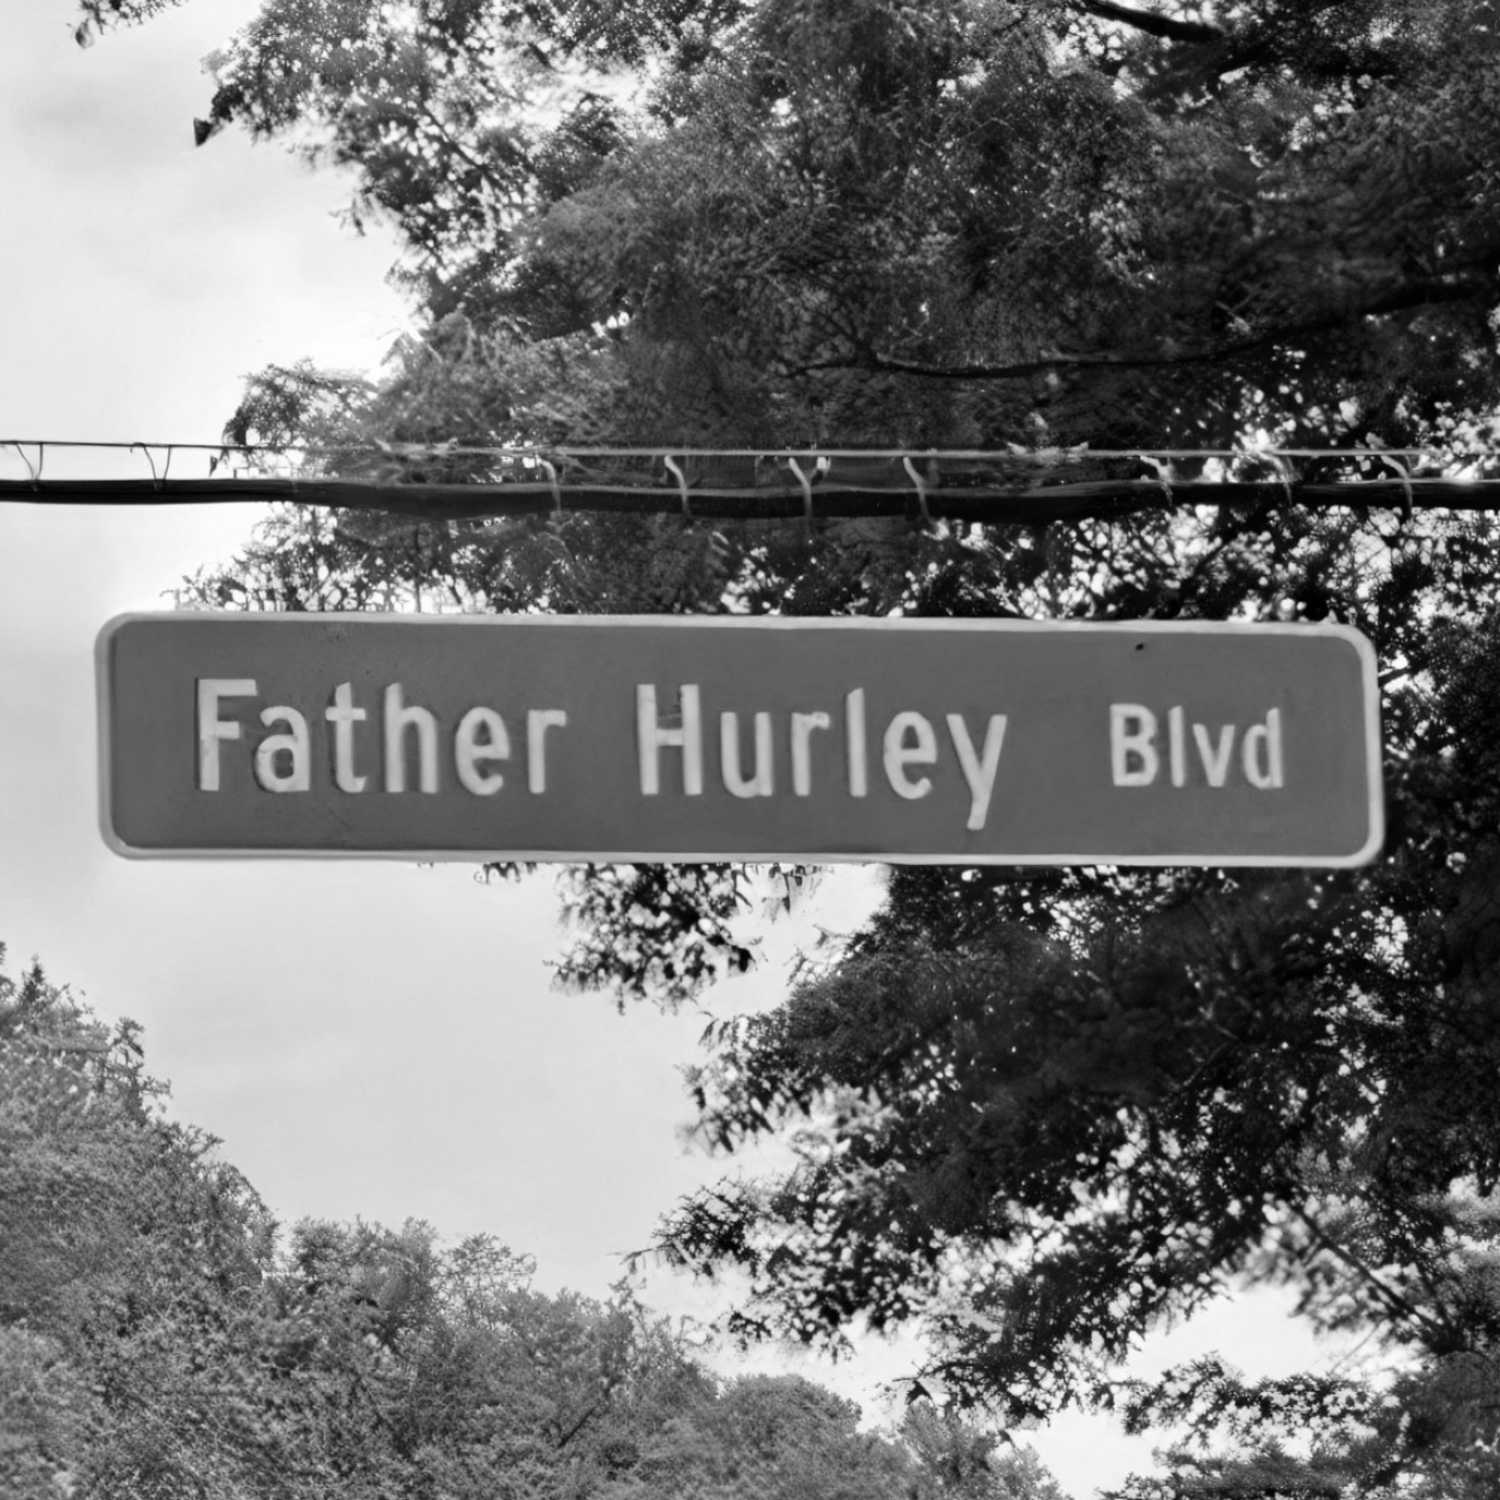 Father Hurley Blvd